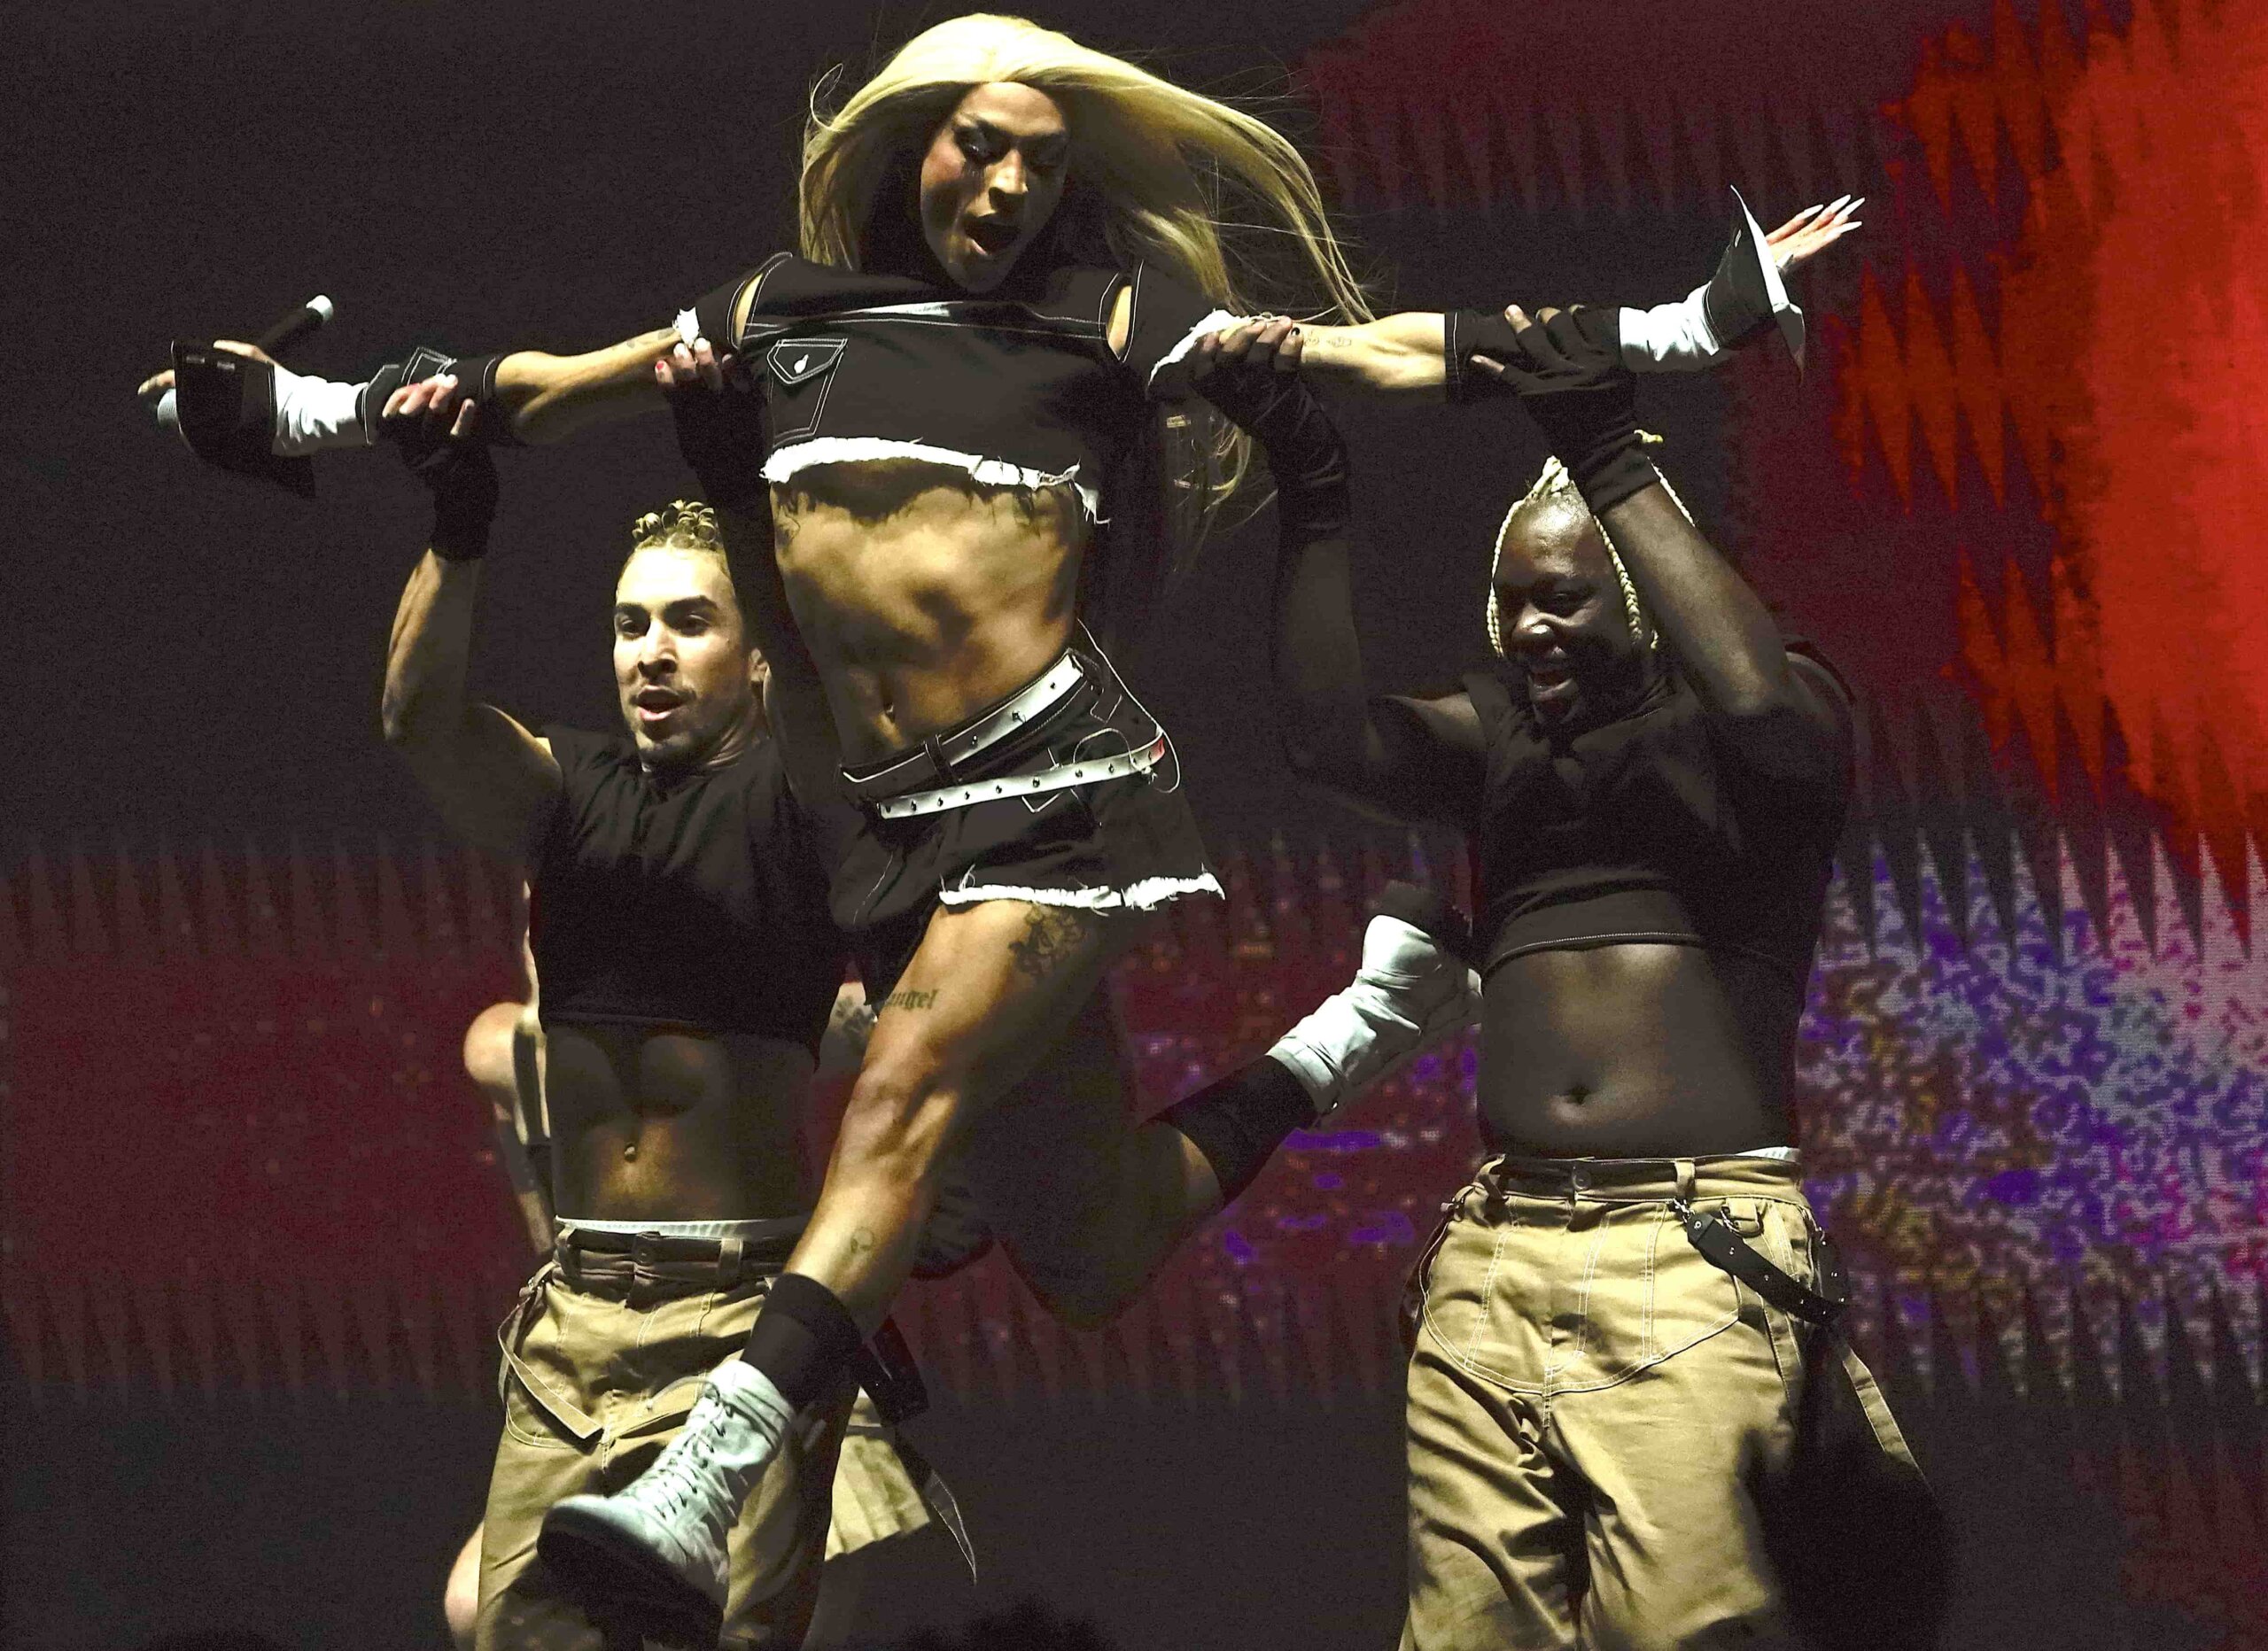 A fit young queen in a blonde wig is lifted up by two dancers during a concert performance.